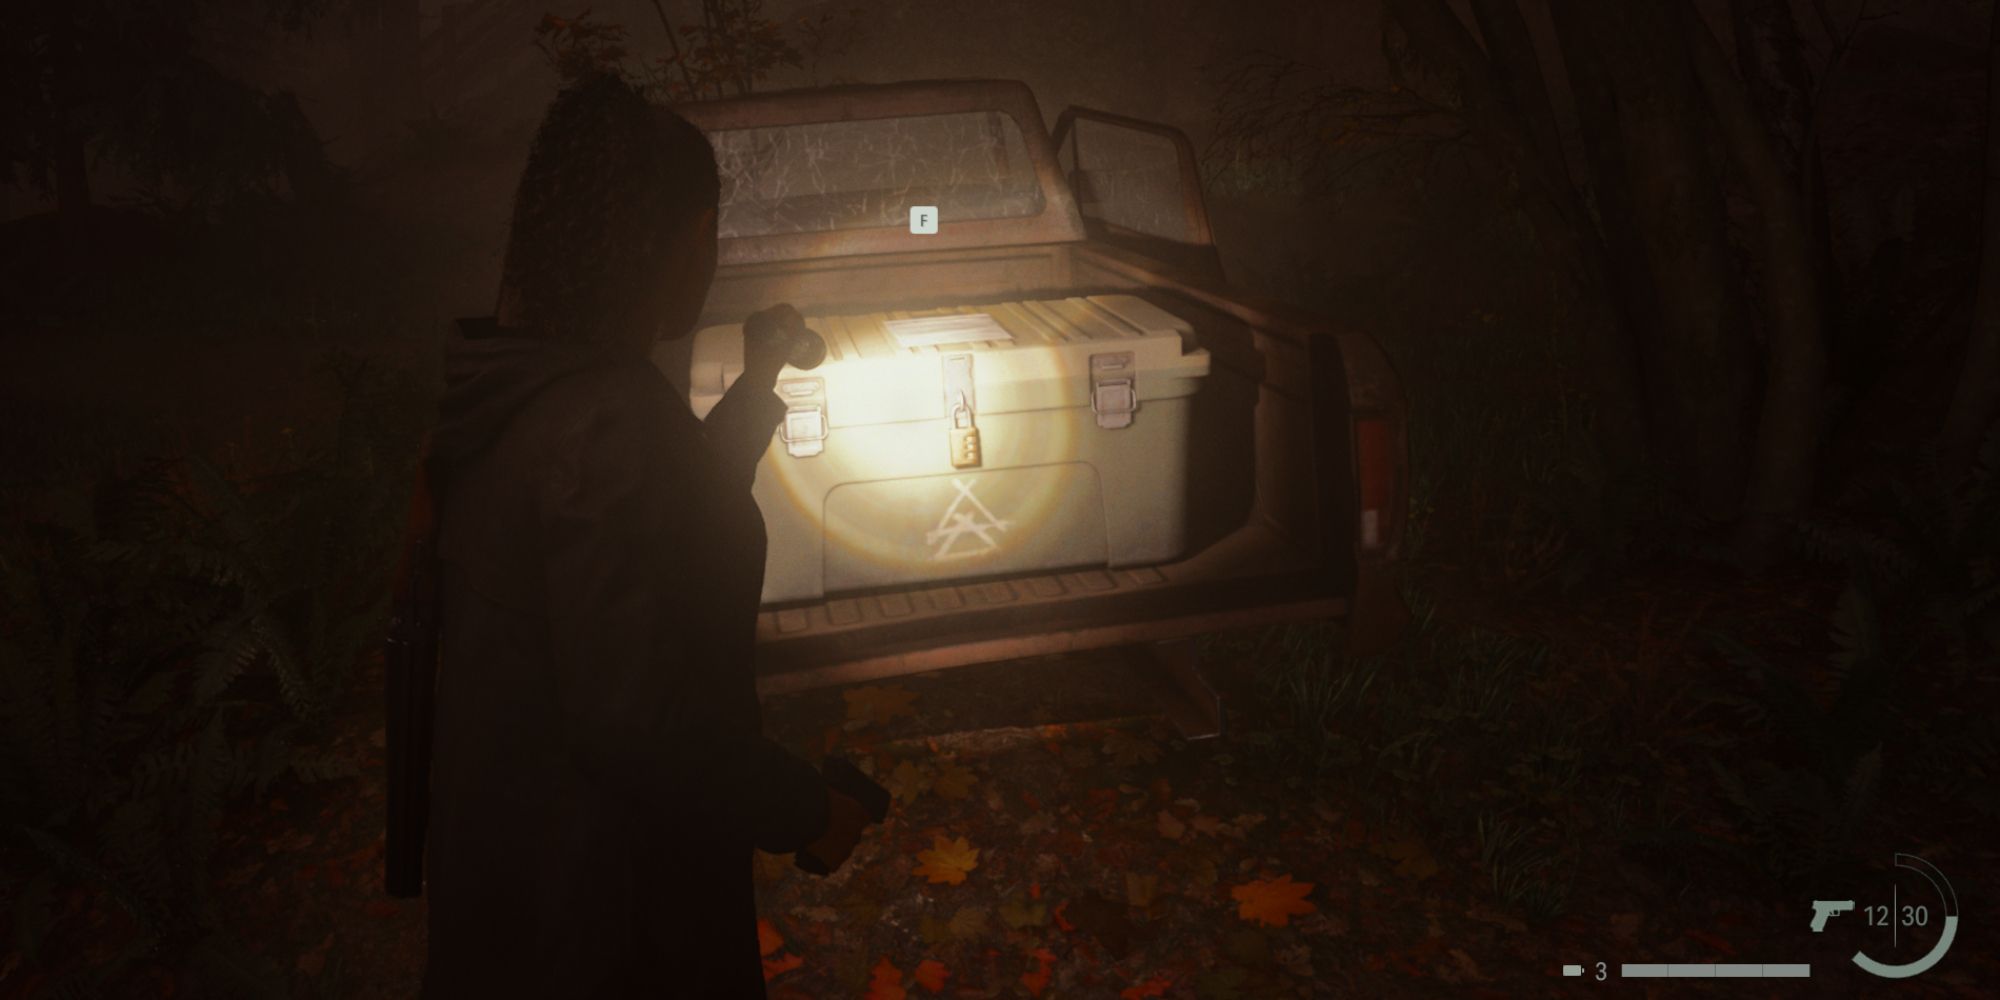 Saga Anderson finds a Cult Stash in the bed of an abandoned pickup truck in Bunker Woods in Alan Wake 2